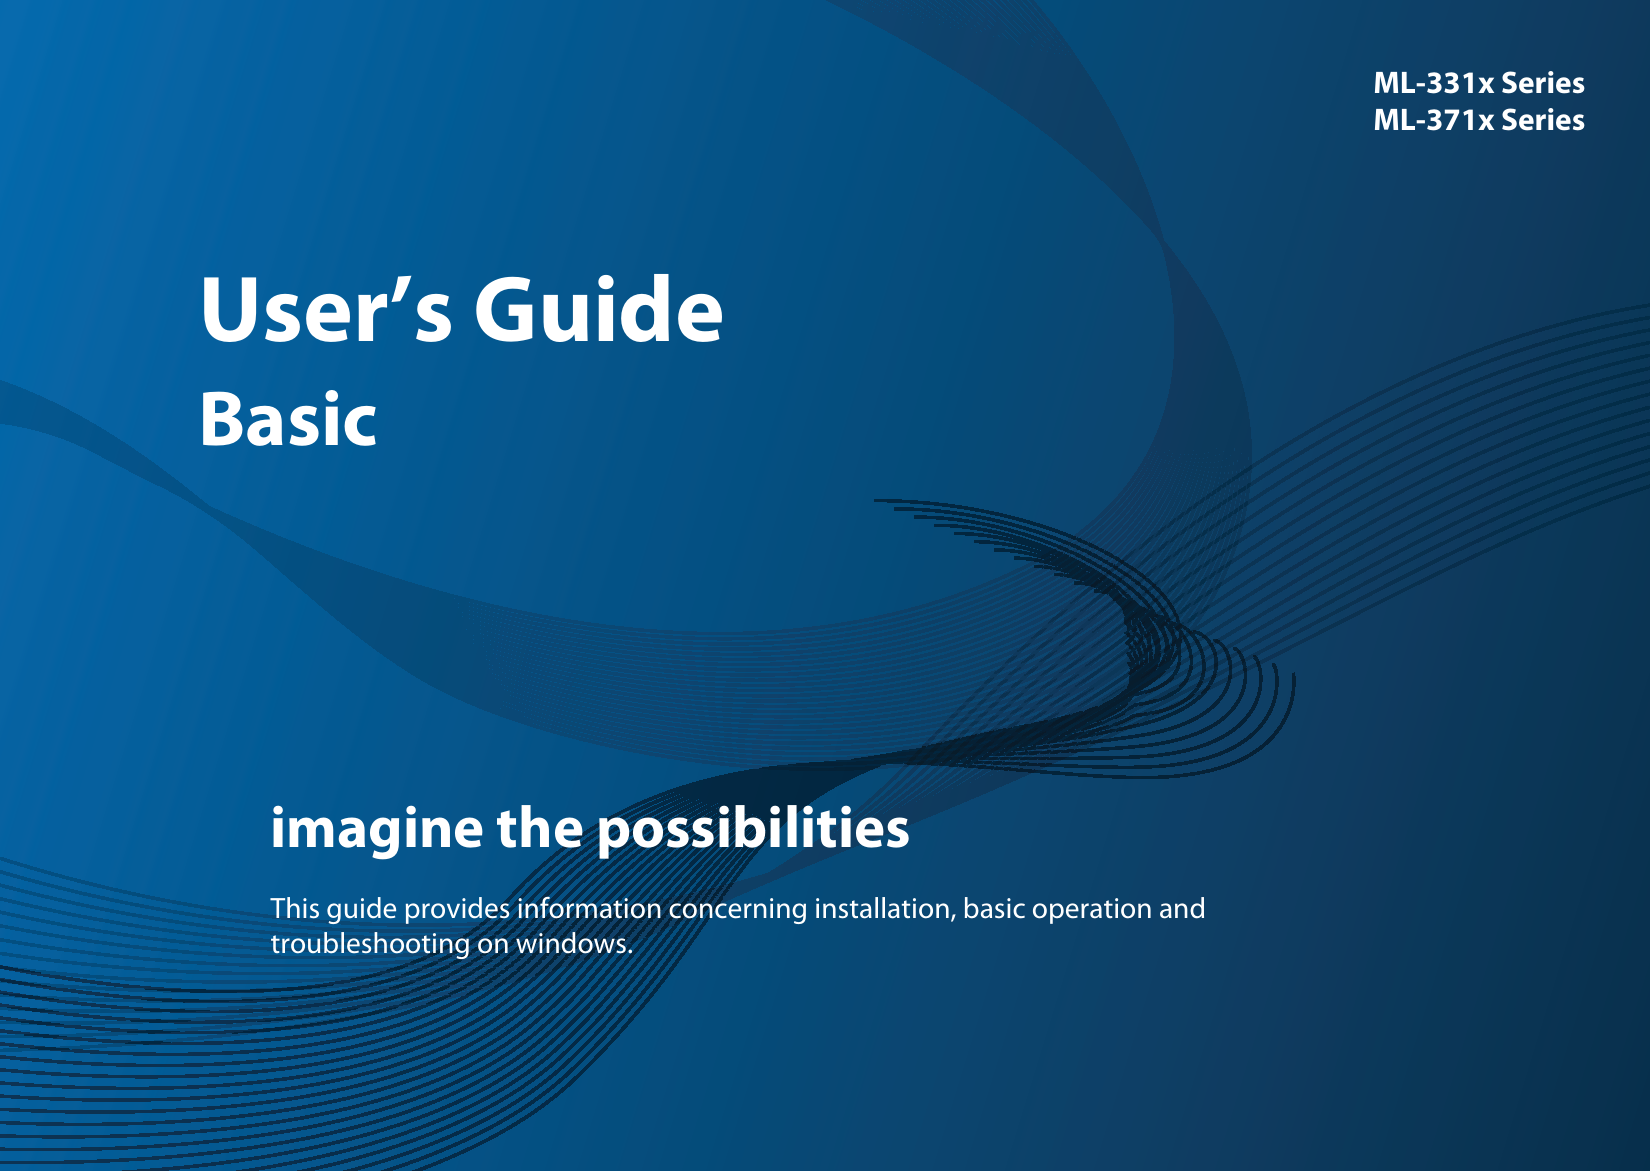 ML-331x SeriesML-371x SeriesUser’s GuideBasicimagine the possibilitiesThis guide provides information concerning installation, basic operation and troubleshooting on windows.